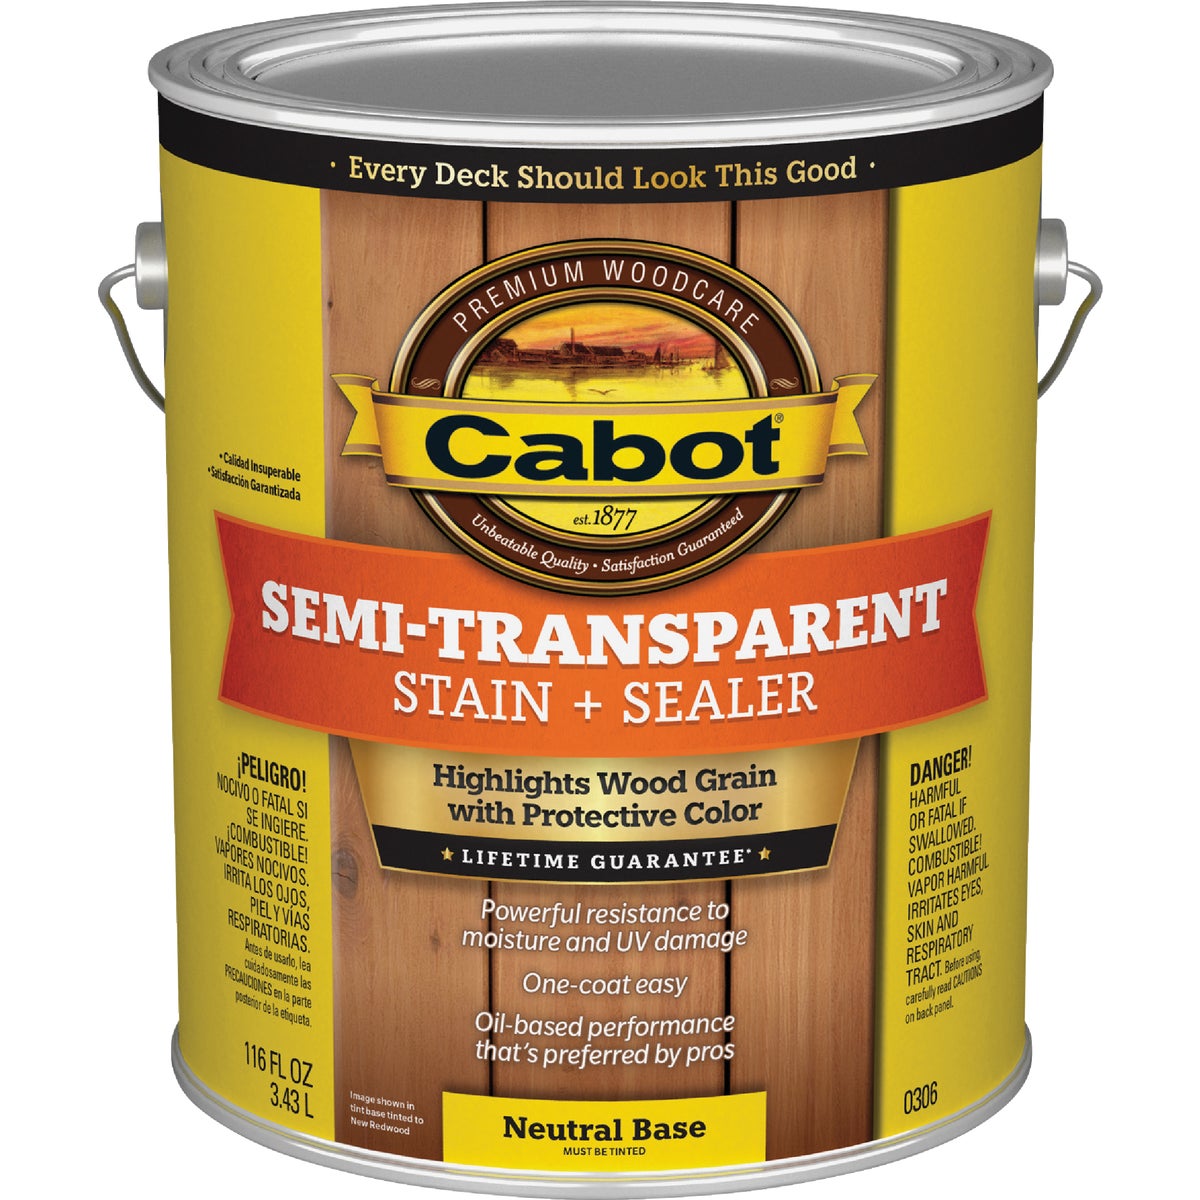 Item 792042, These stains are deep penetrating, linseed oil-based stains that beautify 